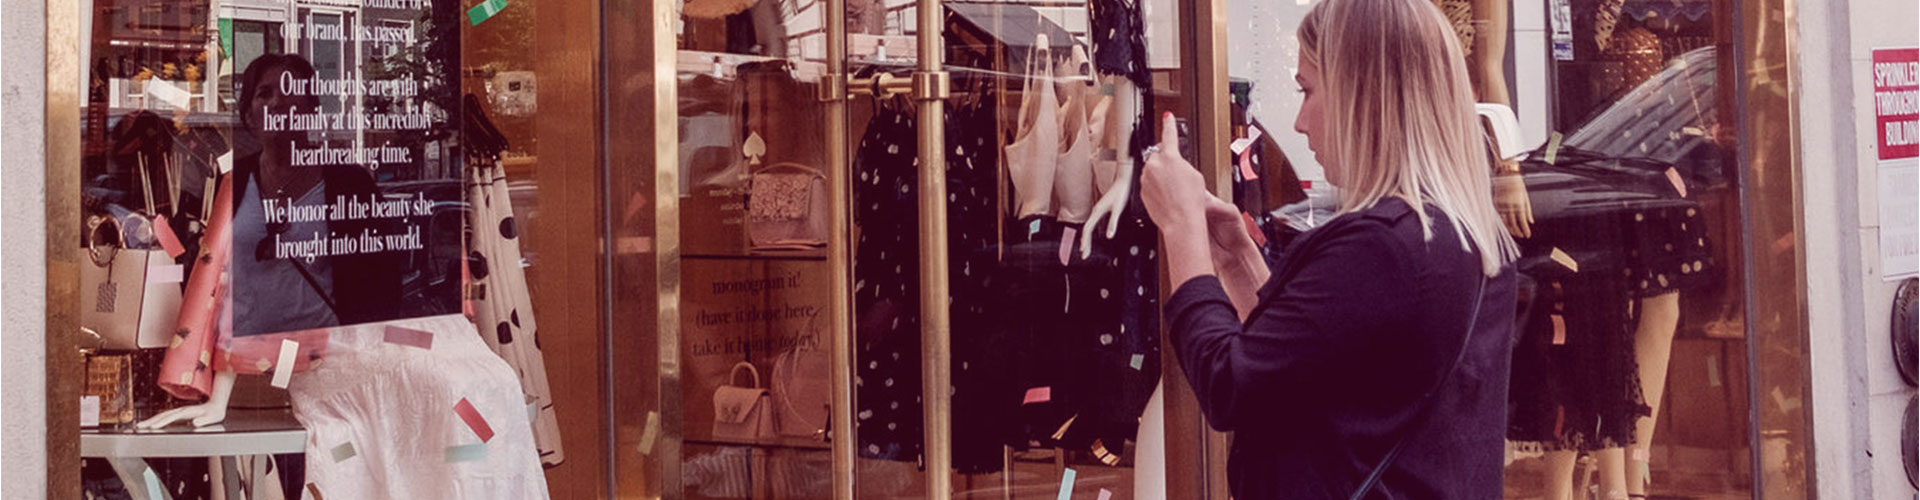 Blog banner featuring woman looking into Kate Spade store window